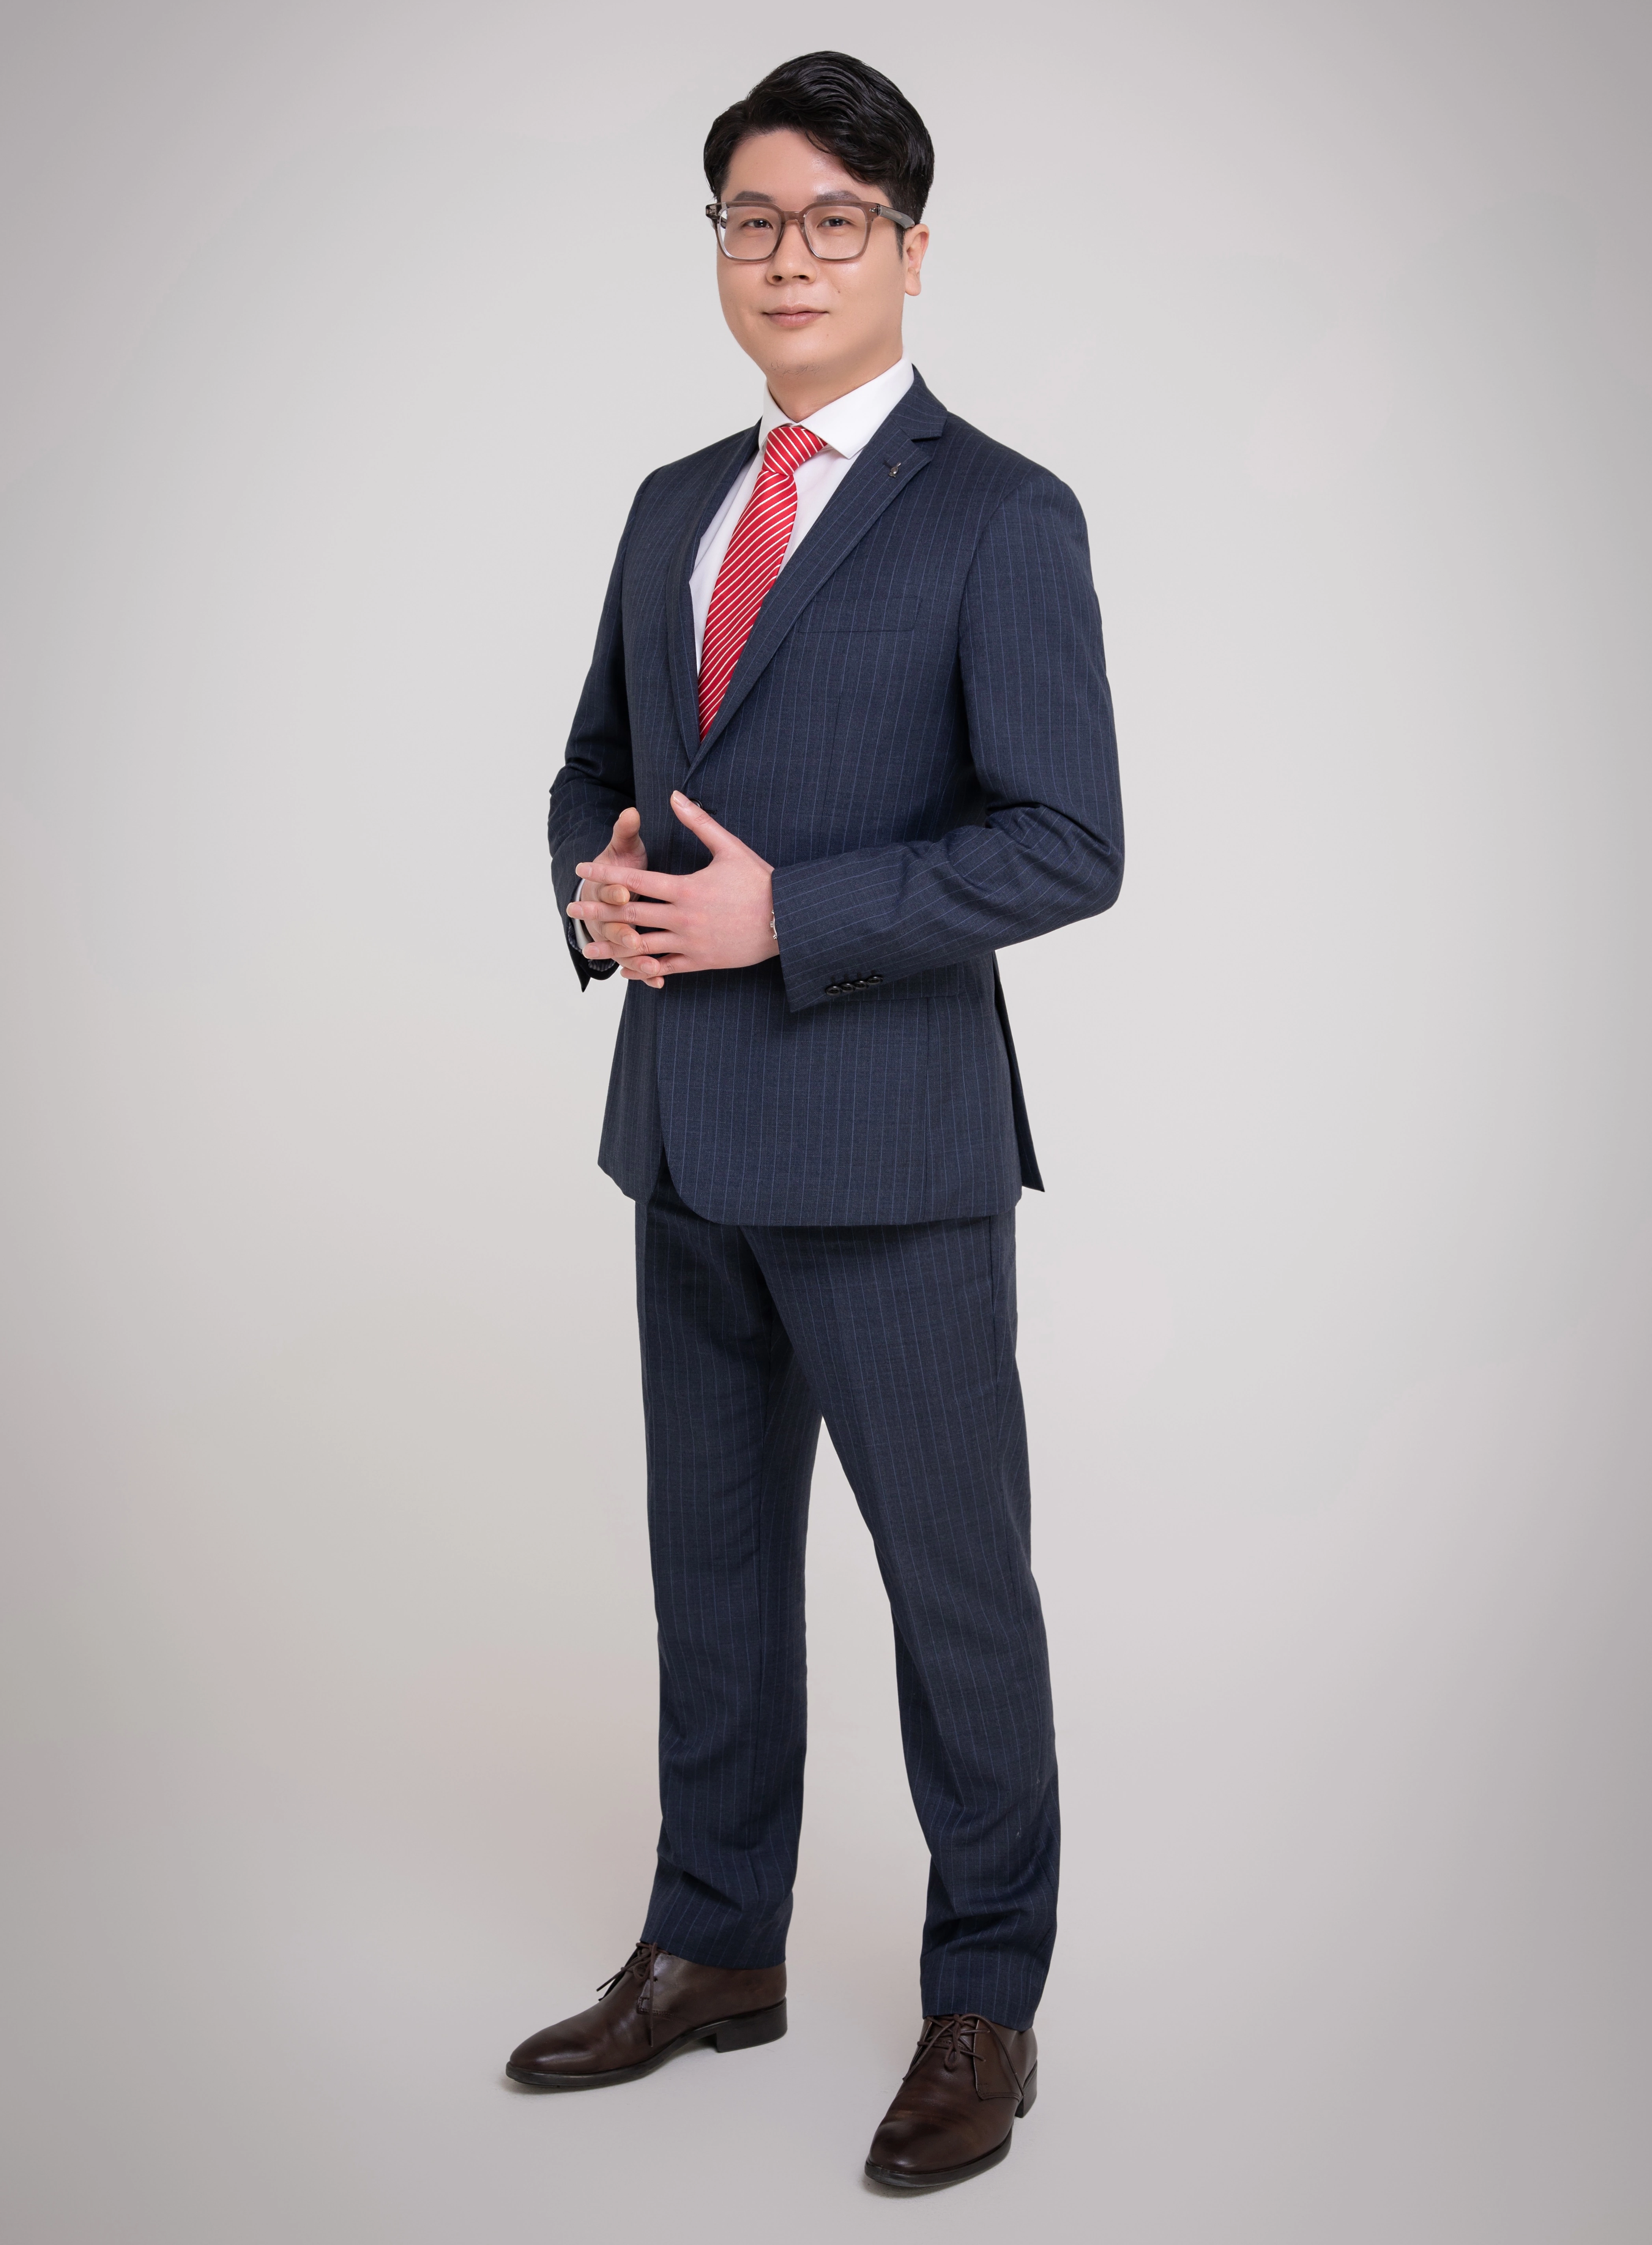 Marco Liao Real Estate Agent